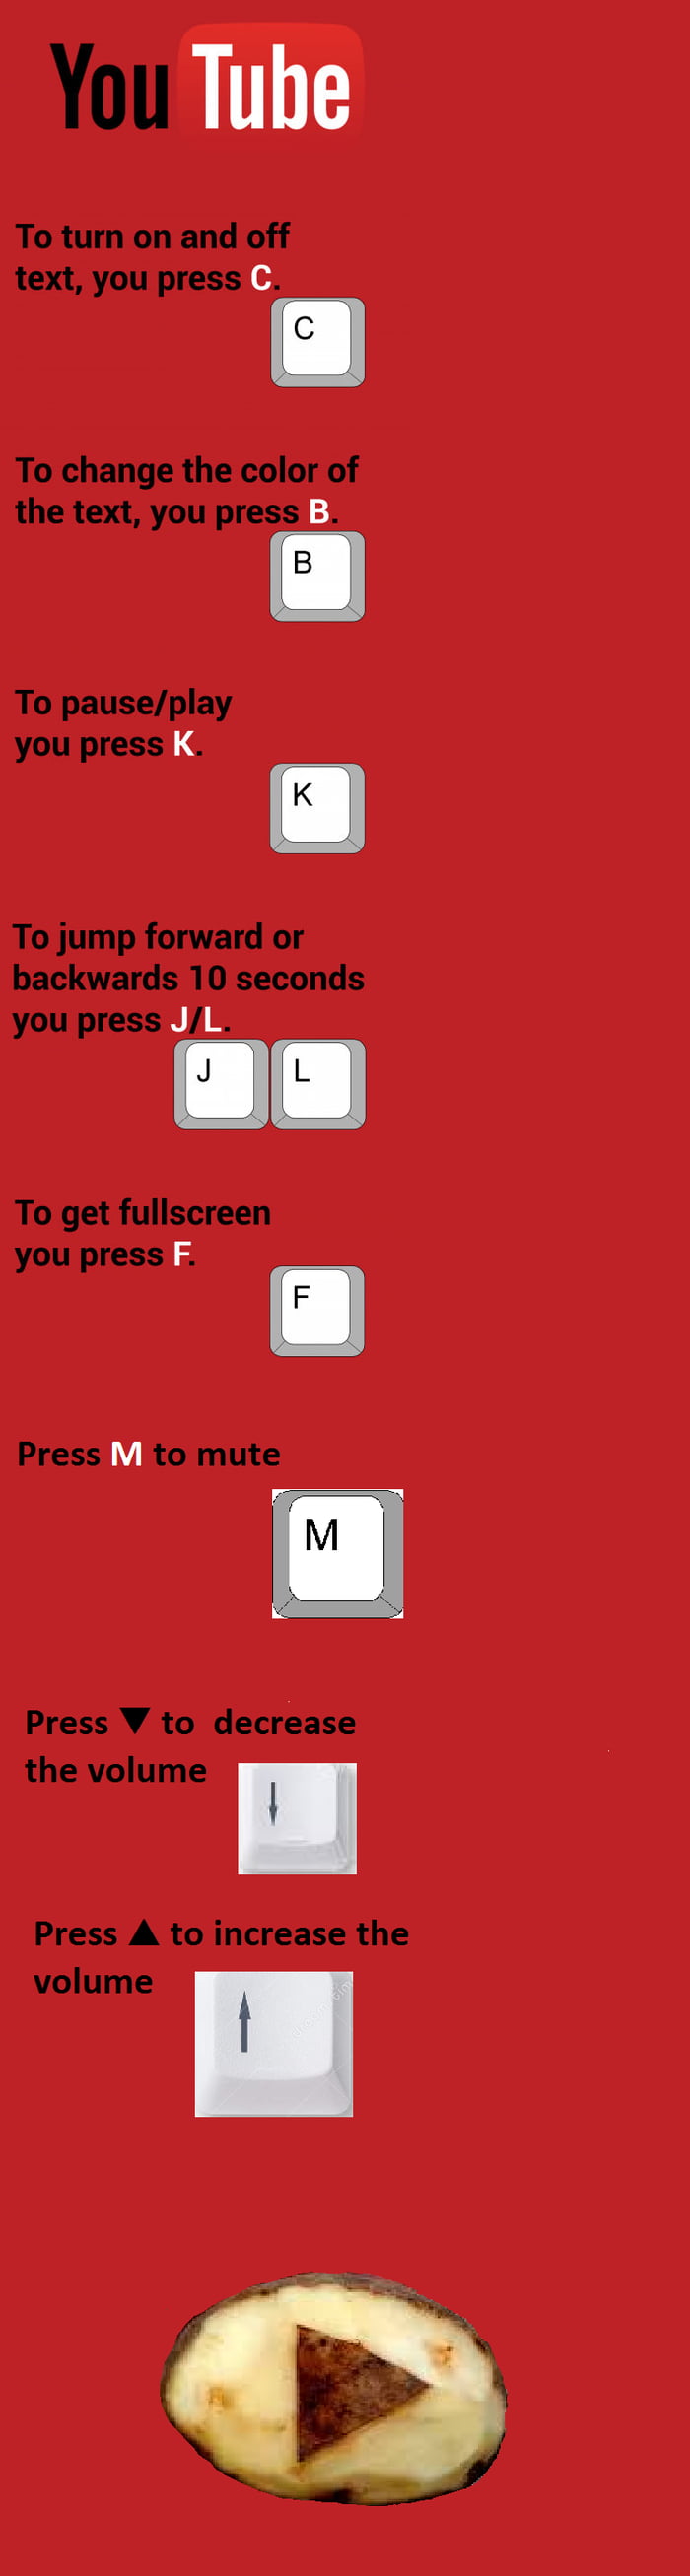 Youtube shortcuts updated - 9GAG